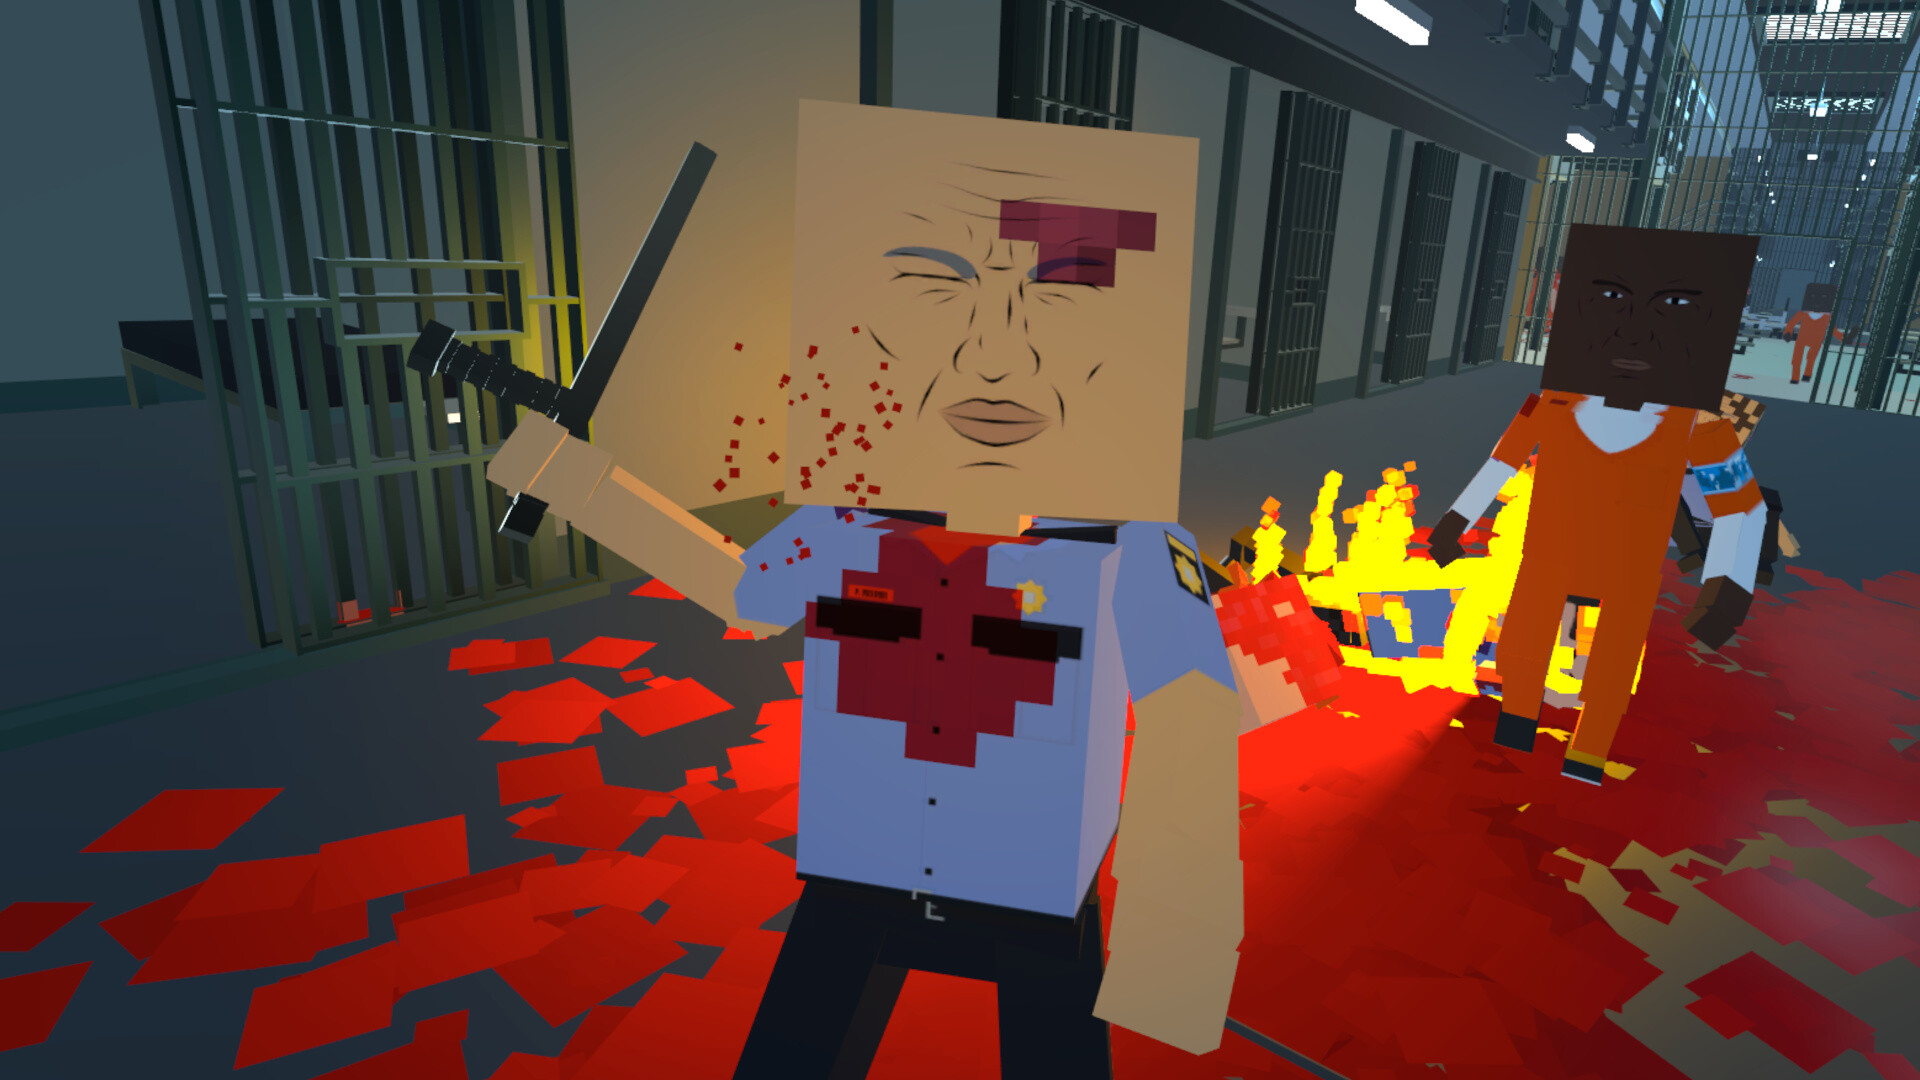 Paint the Town Red VR on Steam